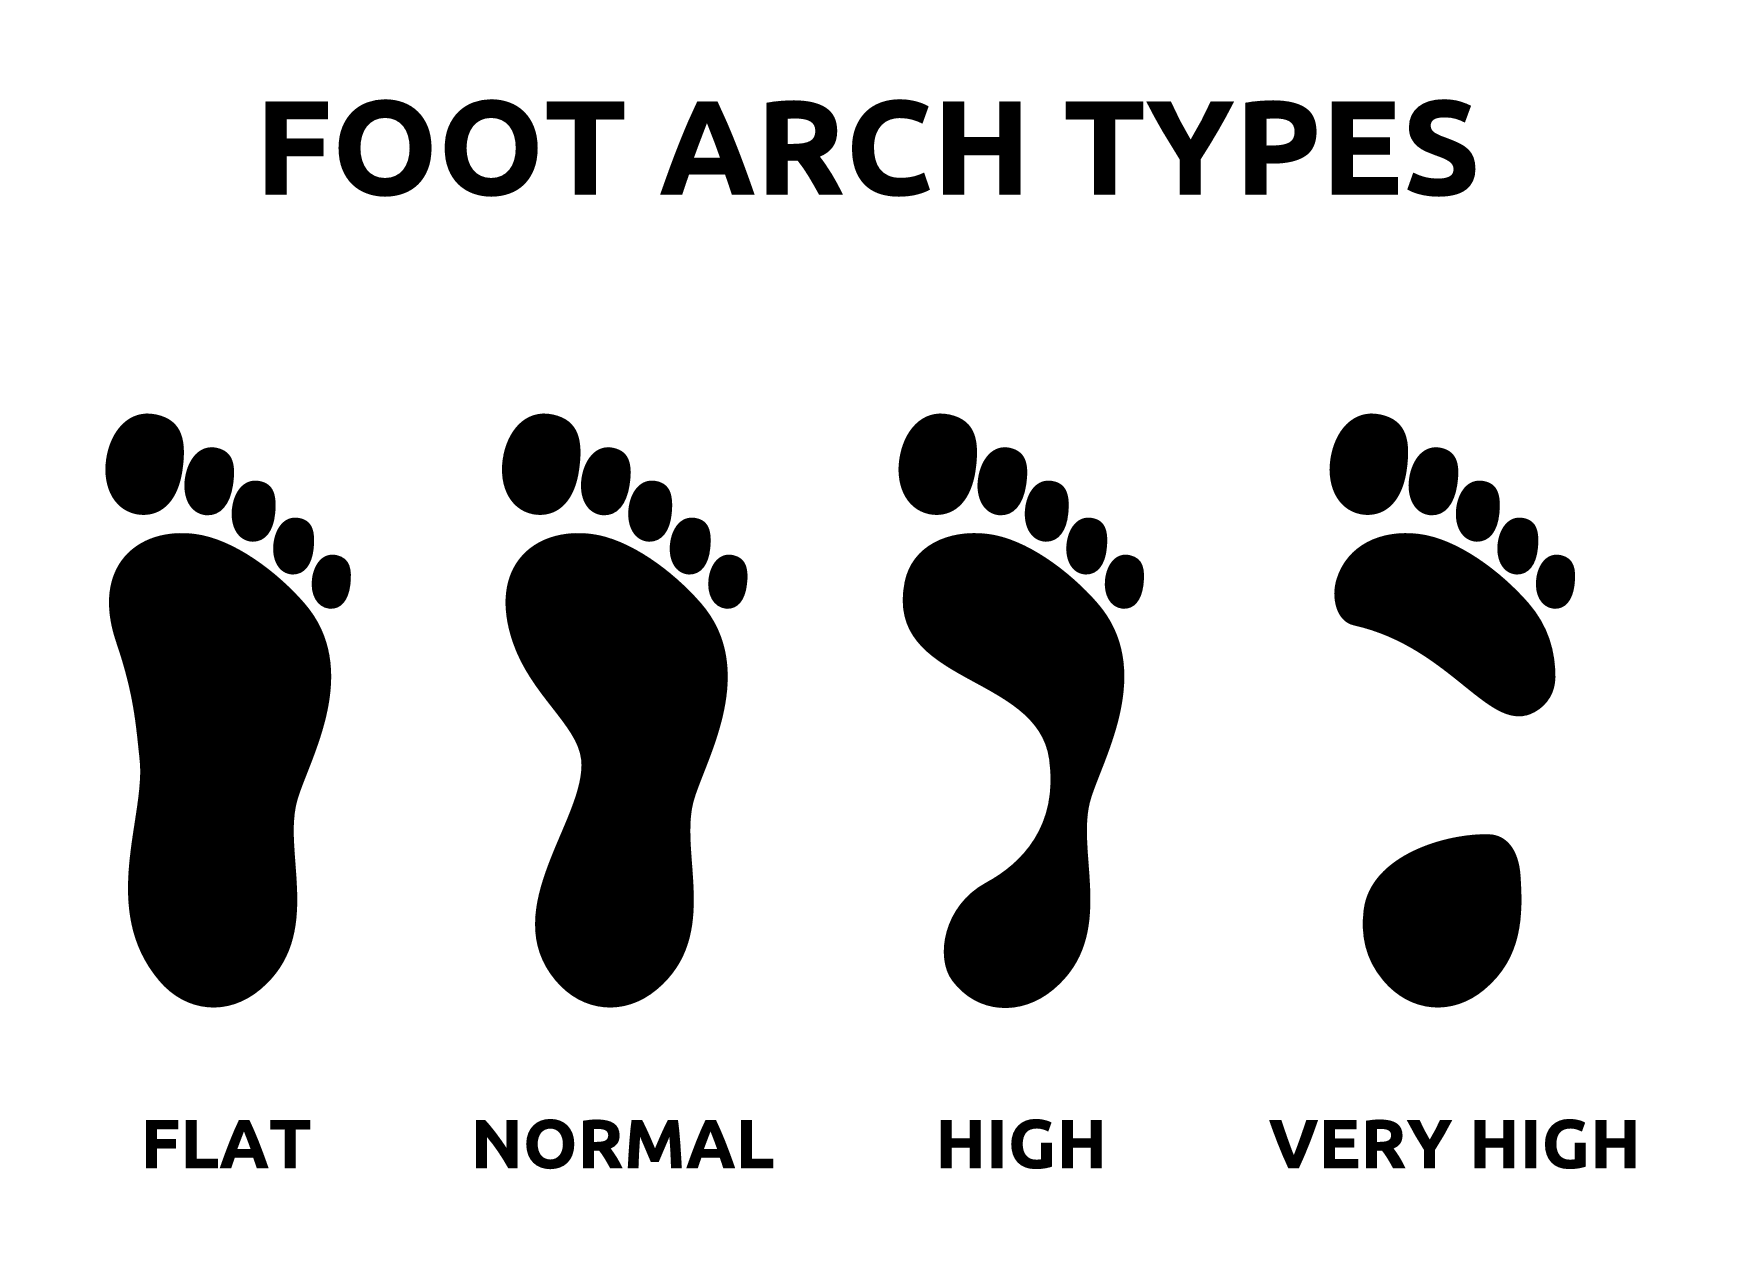 4 foot arch types: flat - normal - high - very high